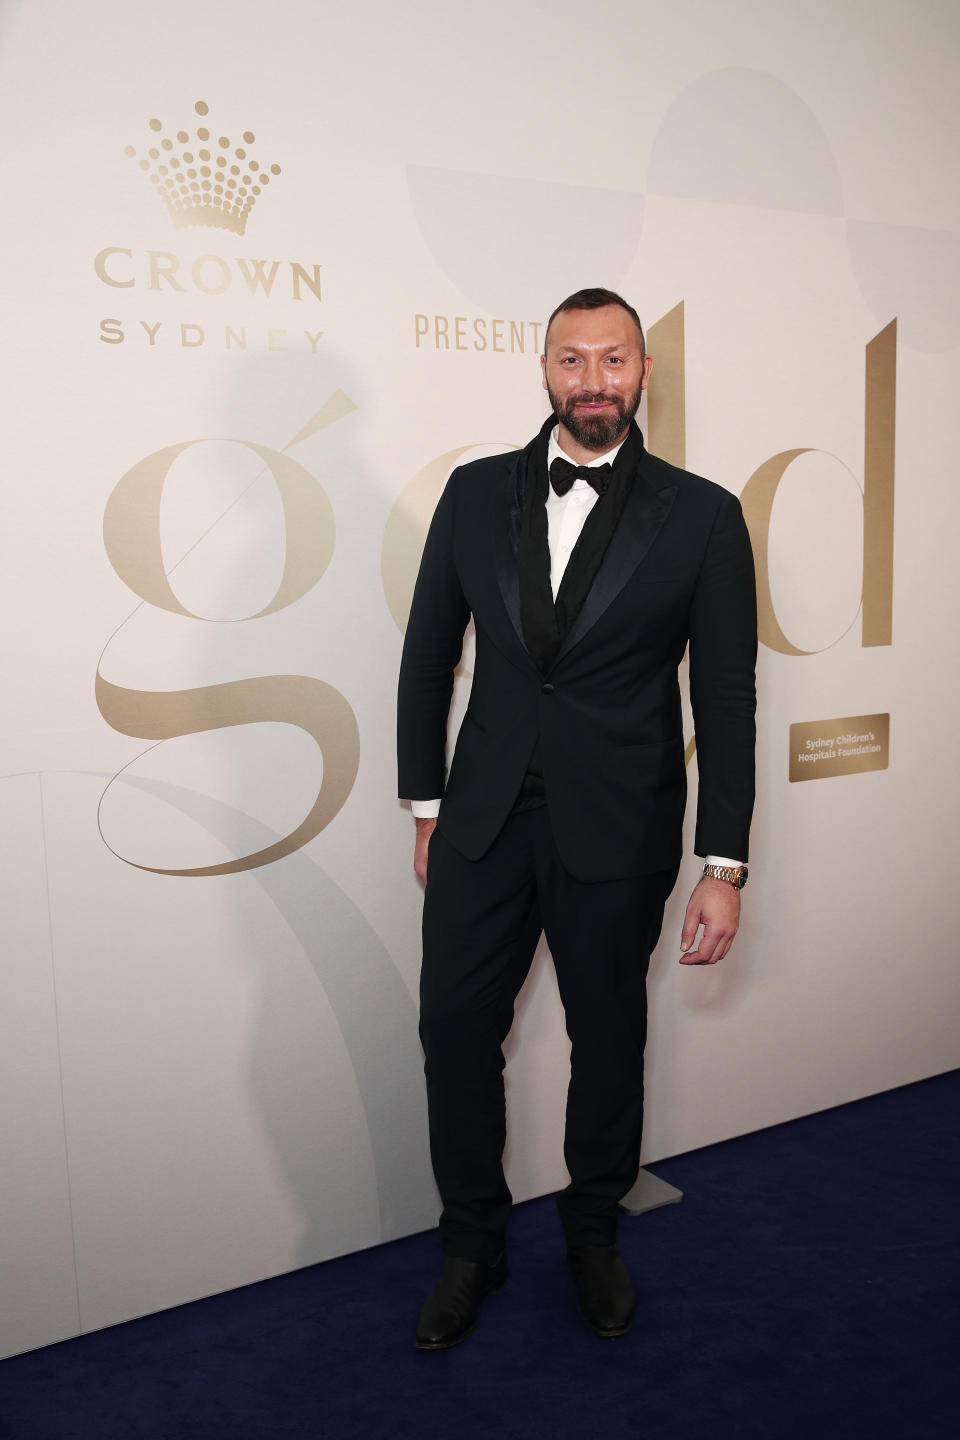 <p>The Olympic gold medallist and retired swimmer has been suffering from mental health issues ever since he was a teenager. Ian Thorpe first publicly admitted to suffering from mental health problems in 2012.</p> <p>In his autobiography, This Is Me, Thorpe reveals that he was heavily dependent on alcohol and was even contemplating suicide. In 2006, Thorpe had announced his retirement from swimming, citing a lack of motivation to compete. He then made a comeback and tried to qualify for the 2012 Olympics, but did not succeed.</p> <p>In 2014, Thorpe was admitted to a rehabilitation centre after he was found dazed near his parents’ home. Today the retired swimmer, along with former cricketer Shane Watson and psychologist Dr Jacques Dellaire, run Beon, a performance coaching business for executives and teams which helps them deal with stress and anxiety.<br><br><strong><em>Image credit: </em></strong>SYDNEY, AUSTRALIA - JUNE 10: Ian Thorpe attends Gold Dinner 2021 on June 10, 2021 in Sydney, Australia. (Photo by Don Arnold/WireImage)</p> 